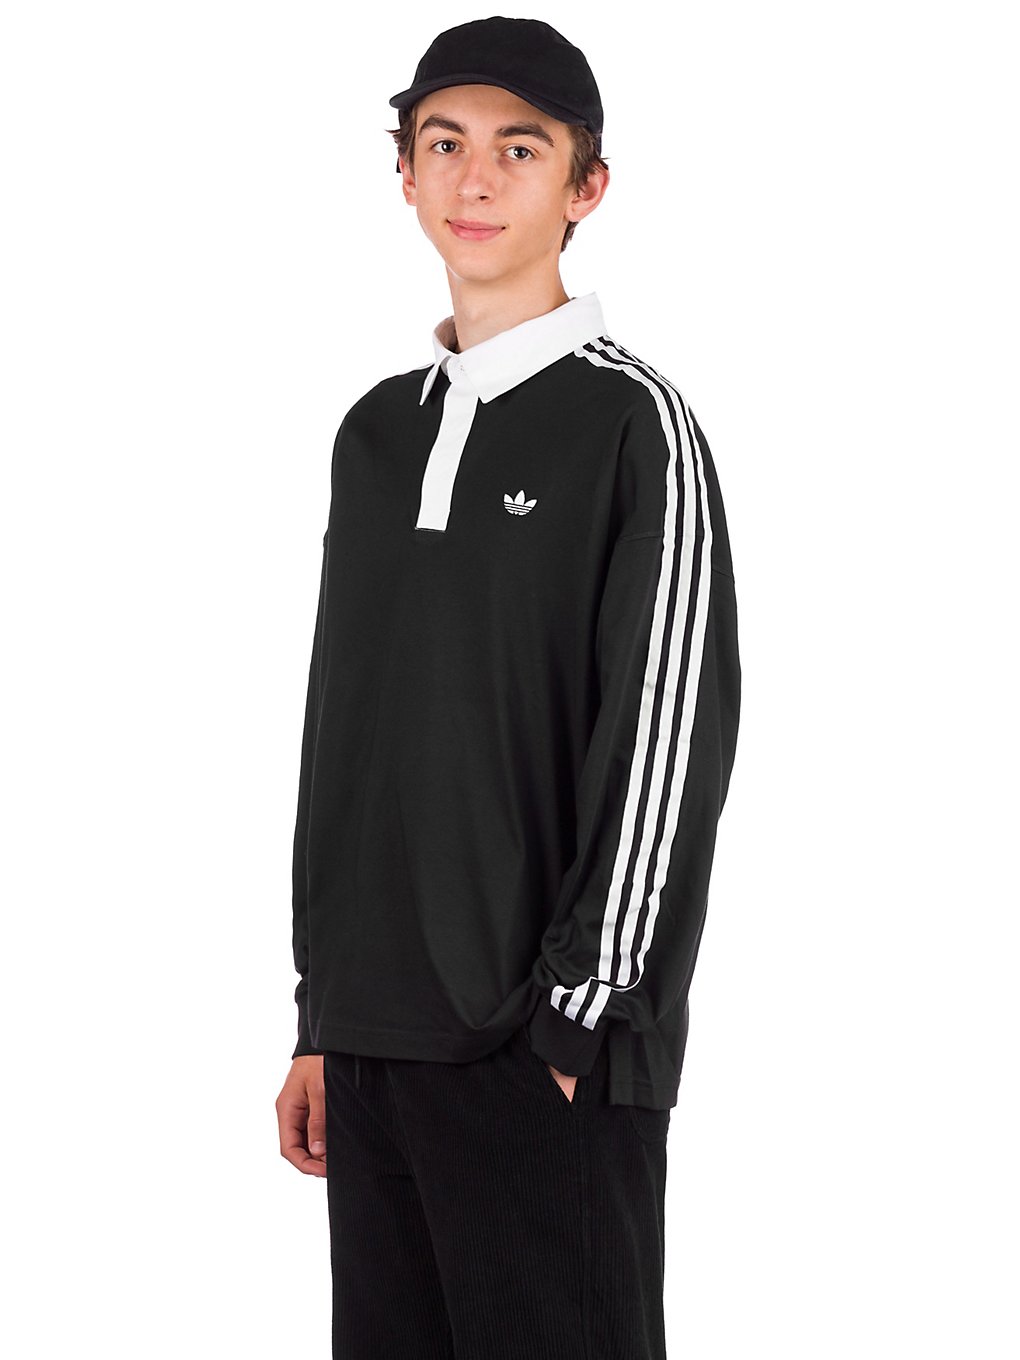 Adidas Skateboarding Solid Rugby Long Sleeve T-Shirt black/white